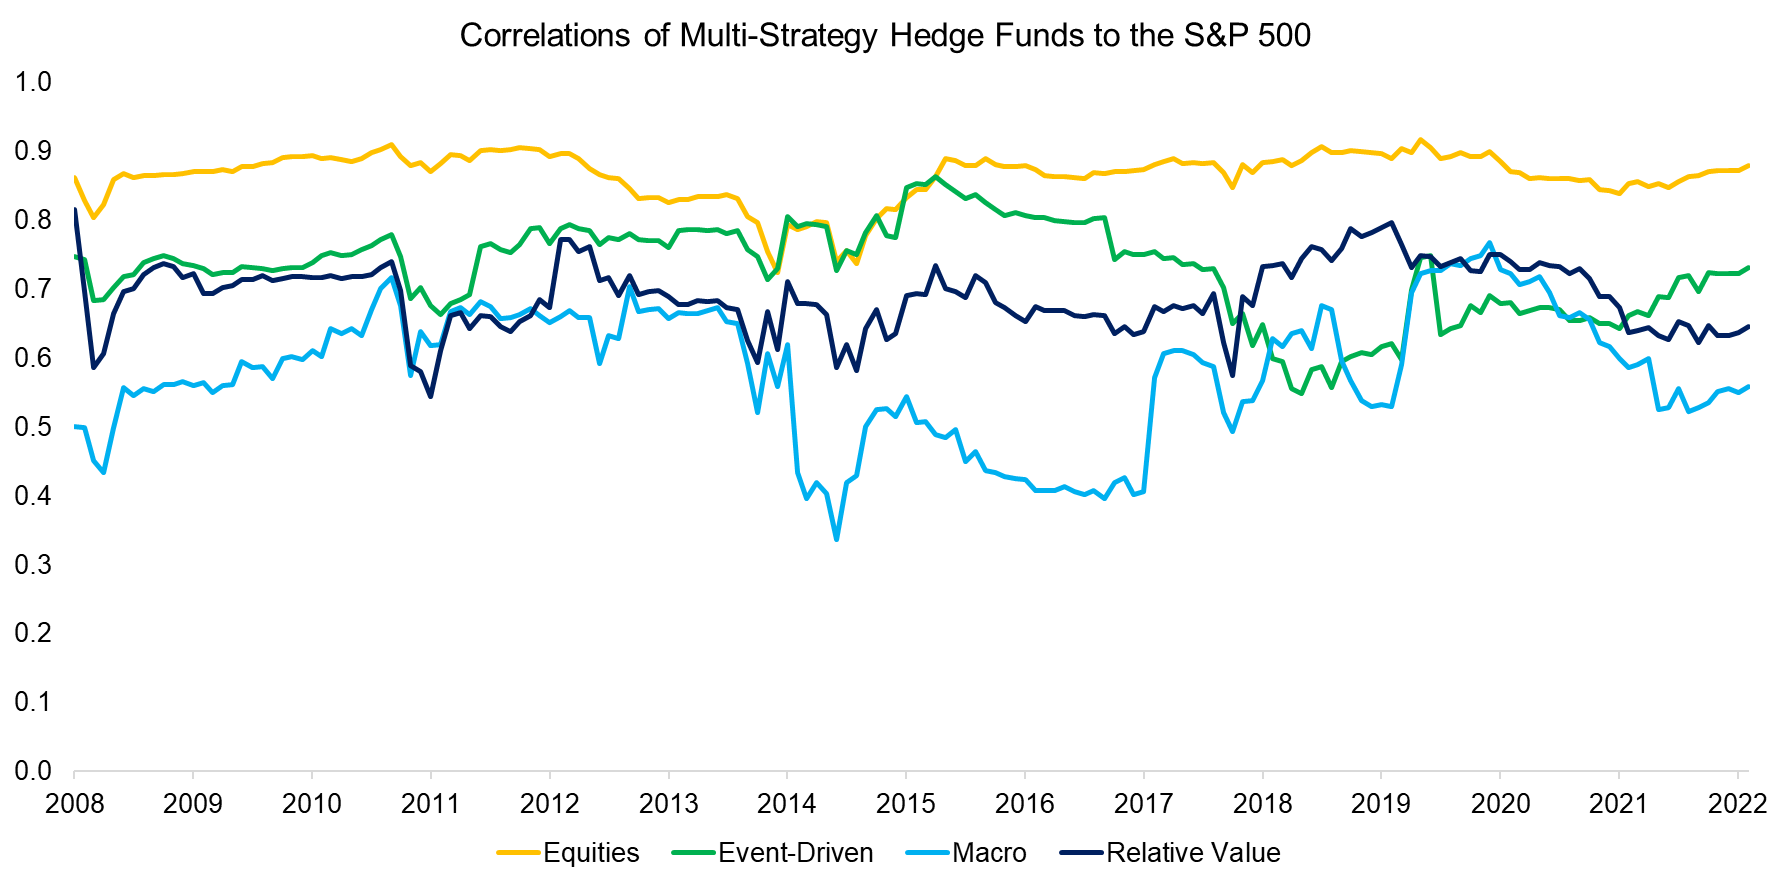 Correlations of Multi-Strategy Hedge Funds to the S&P 500